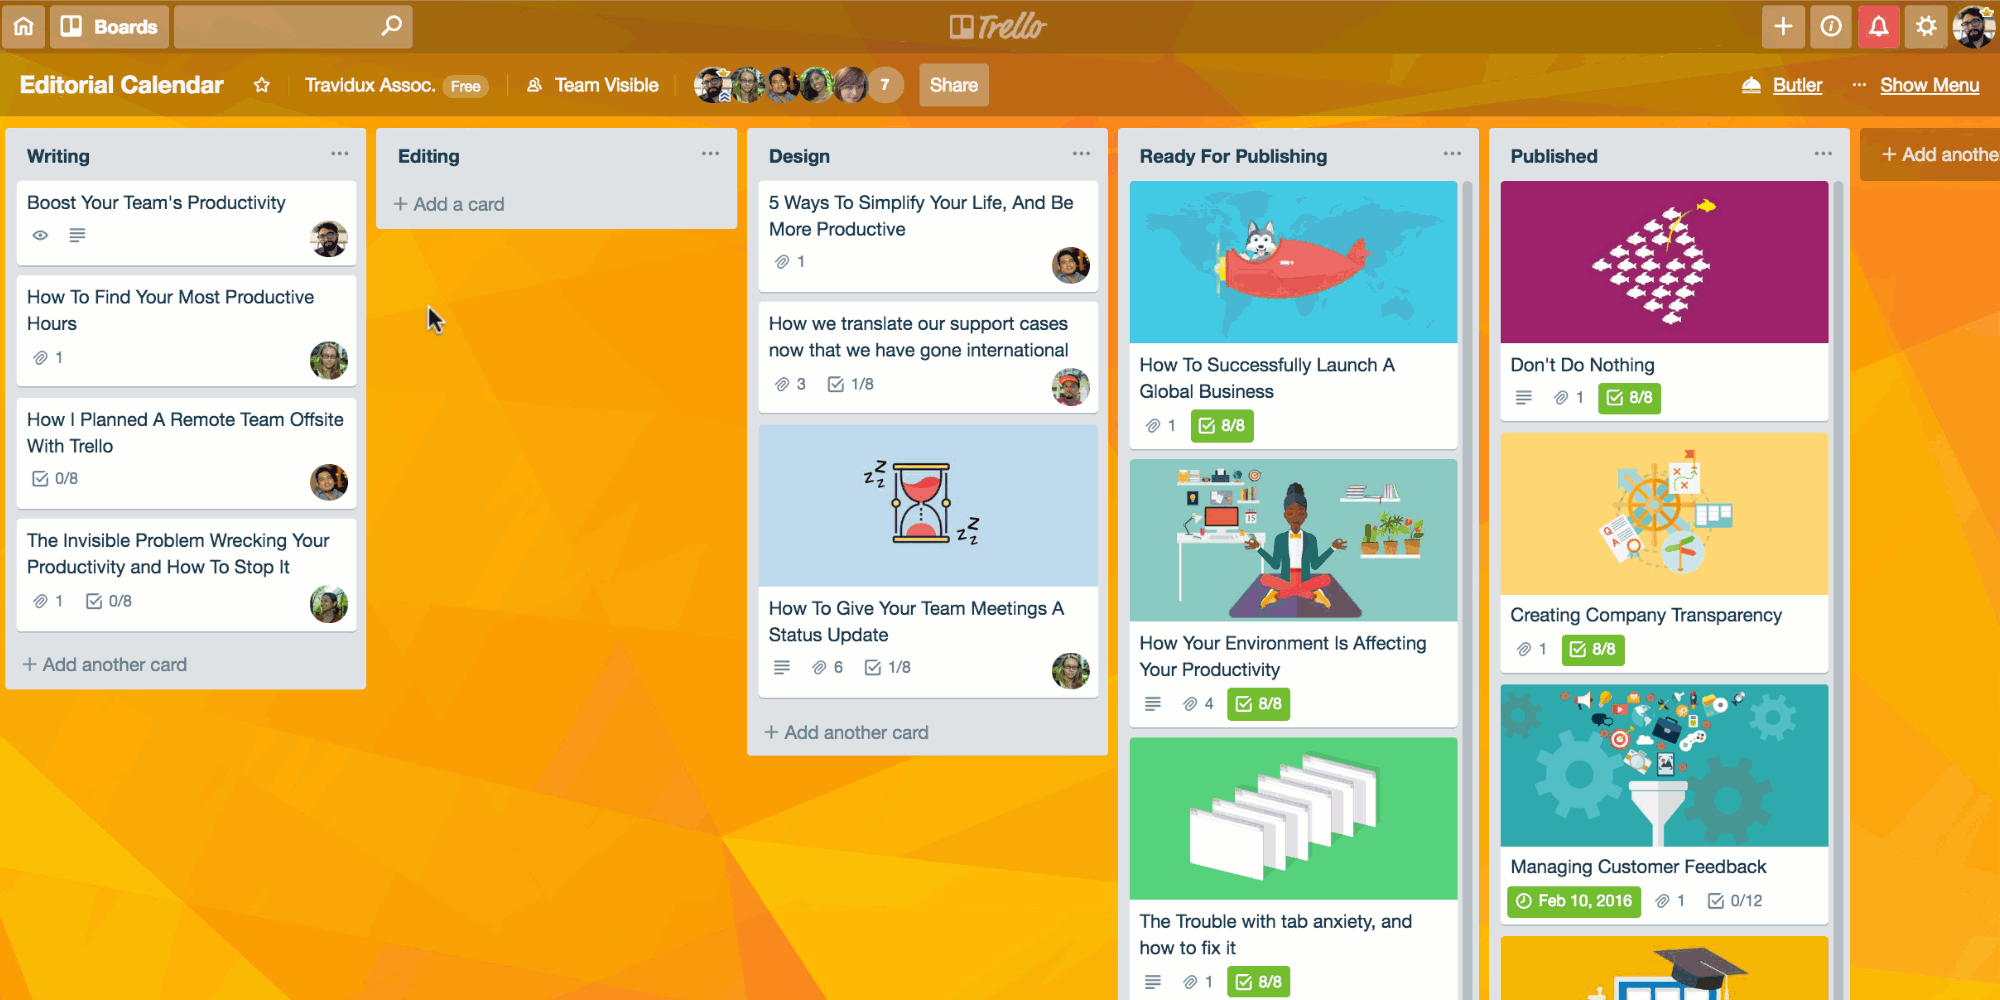 A GIF showing a Trello user clicking a card on the board and selecting the "Next Step" option under "Power-ups" and the task card automatically being populated with due date and labels